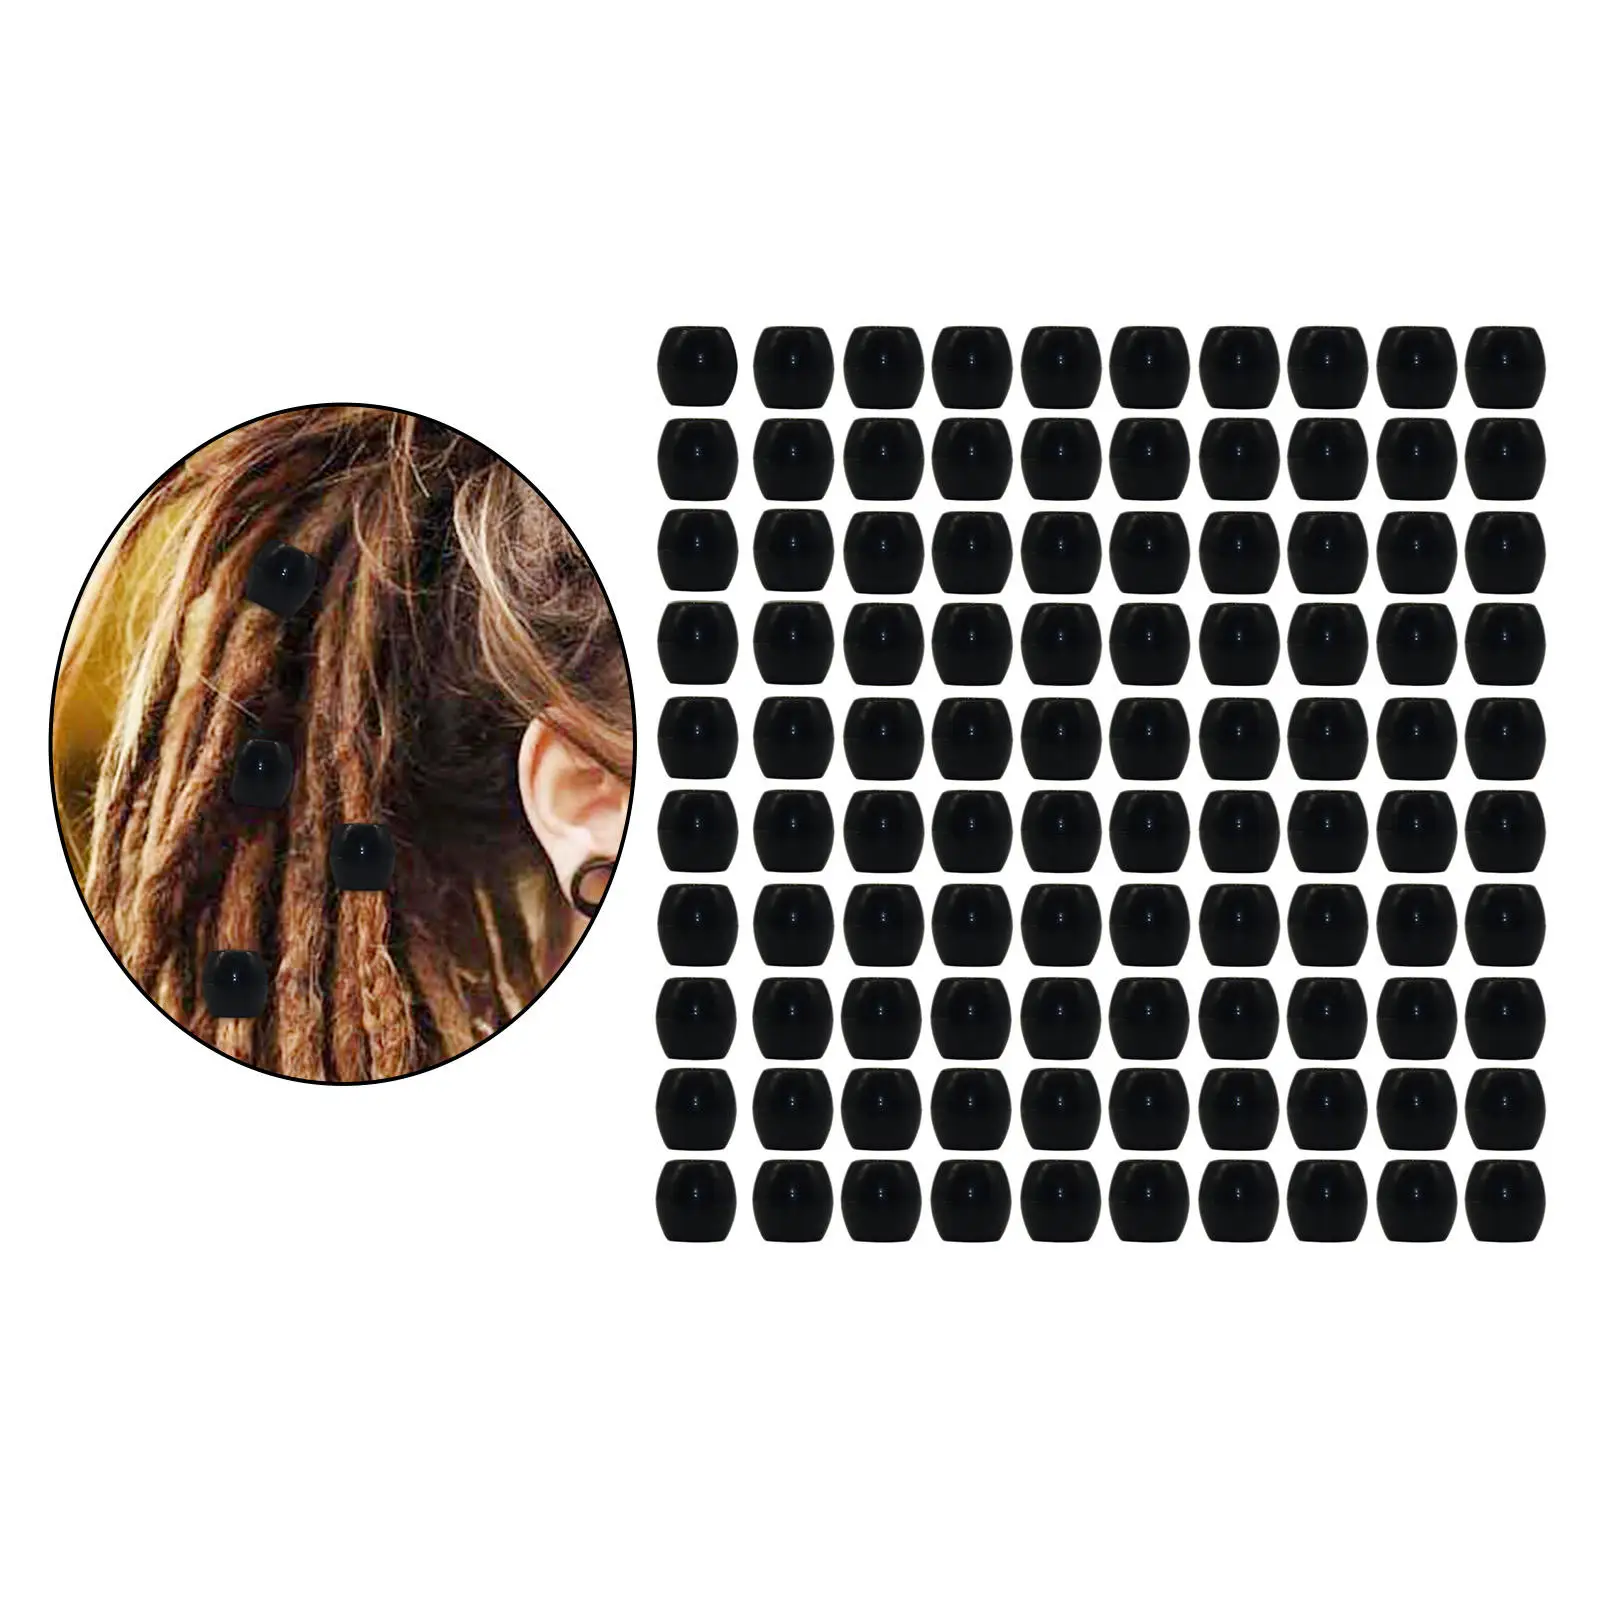 100-in-Pack Hair Beads 10mm Black Accessories Crafts Kit Hair Extension Beads for Photography Dreadlock Make up Link Hair Salon